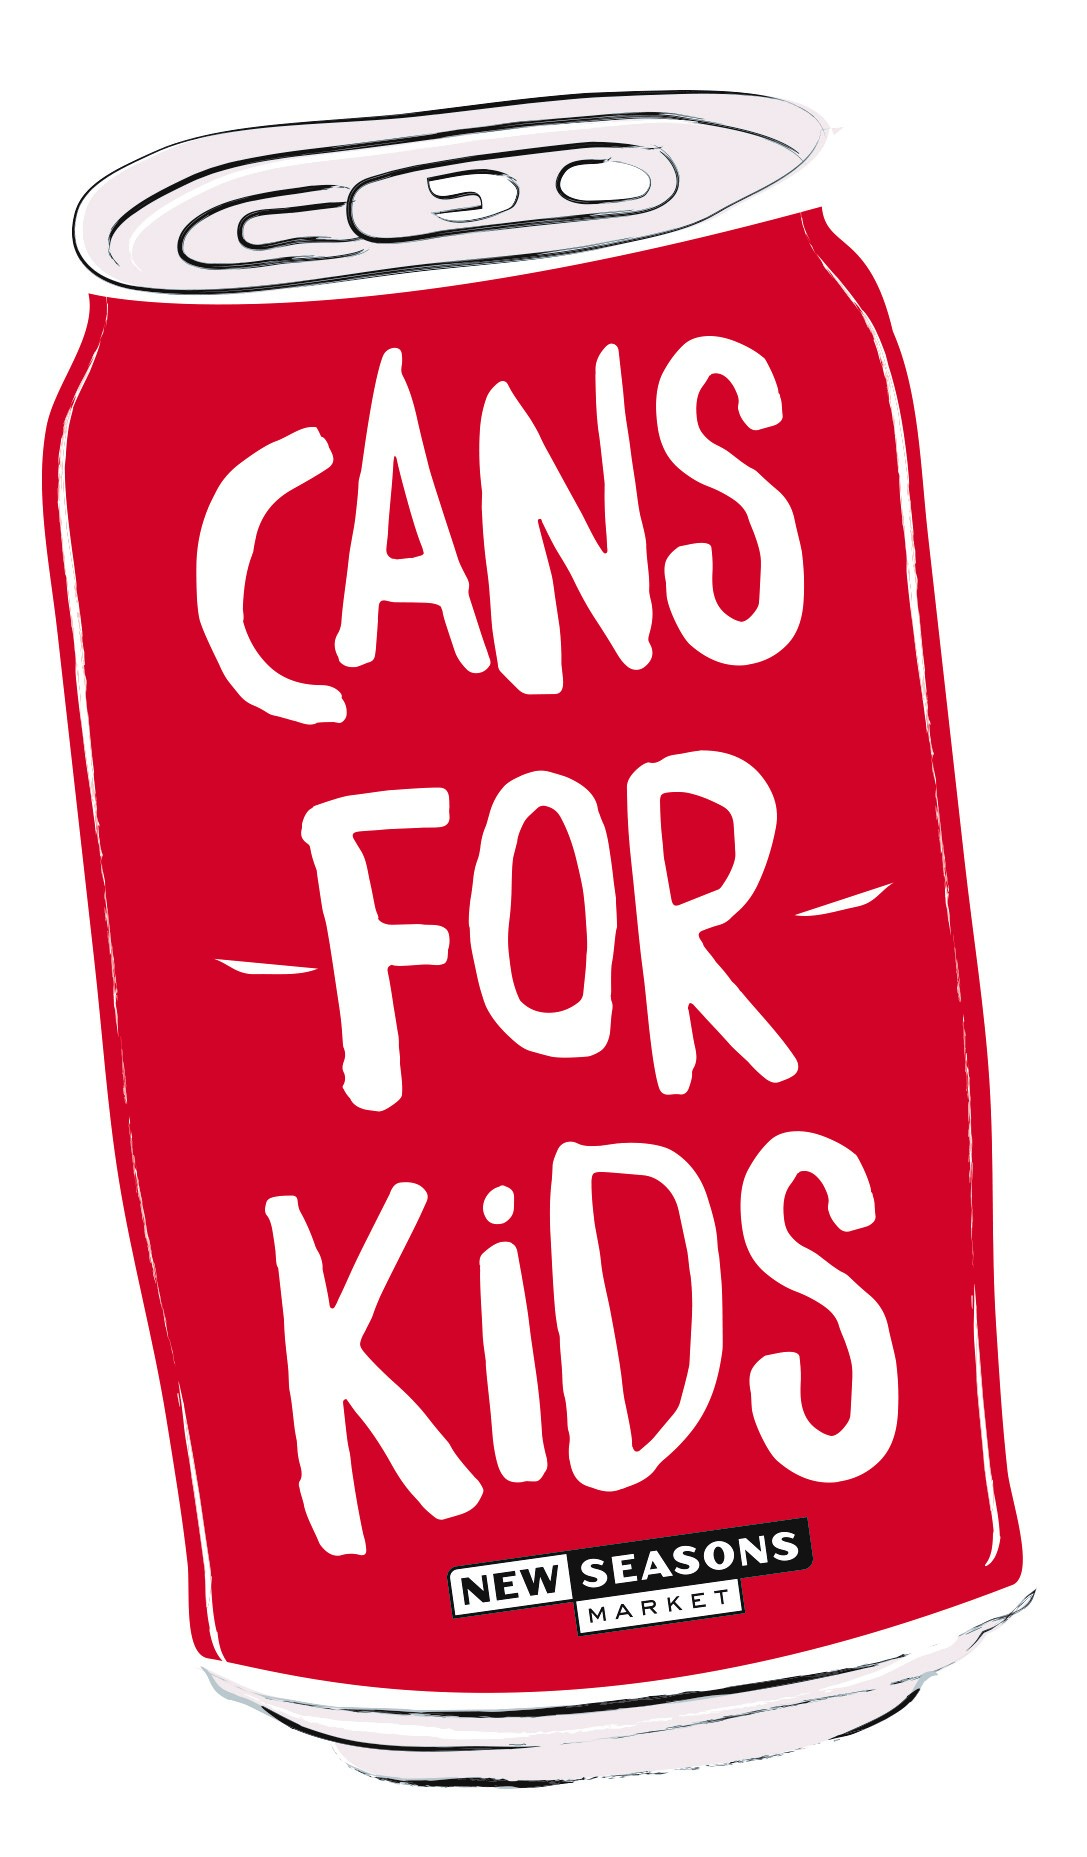 New Seasons Supports Foundation with On-going Can Collection Program